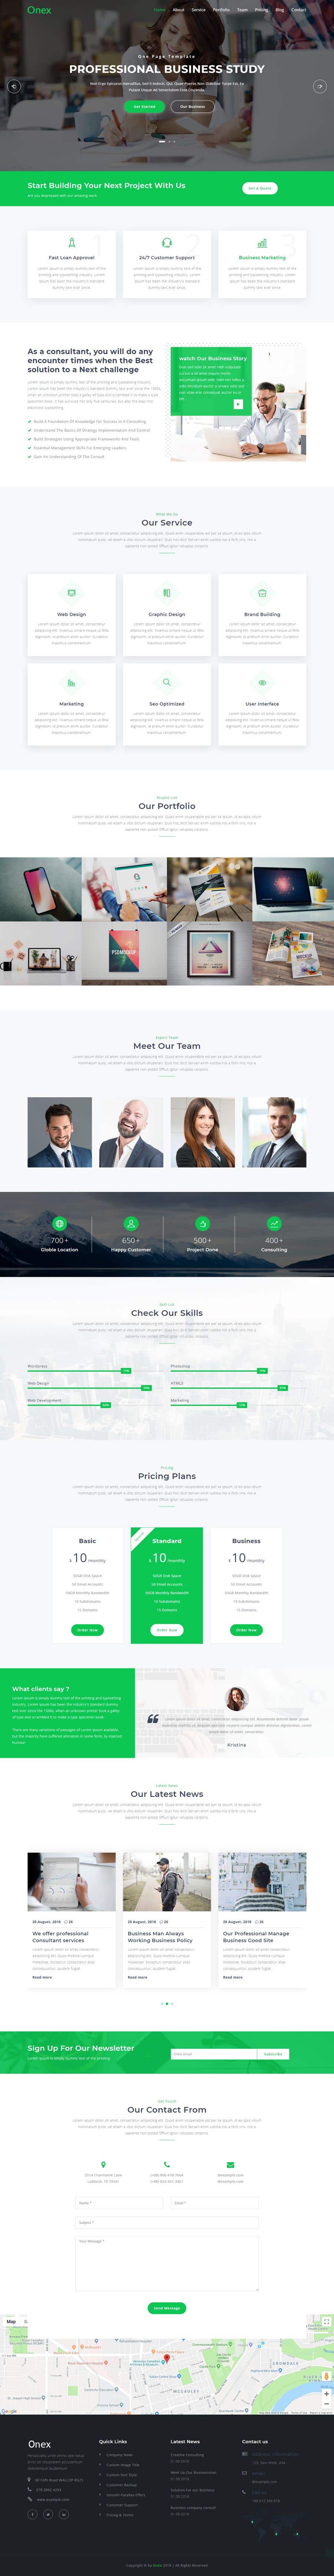 Kandidatura #12për                                                 Design the layout of a business consultancy website
                                            